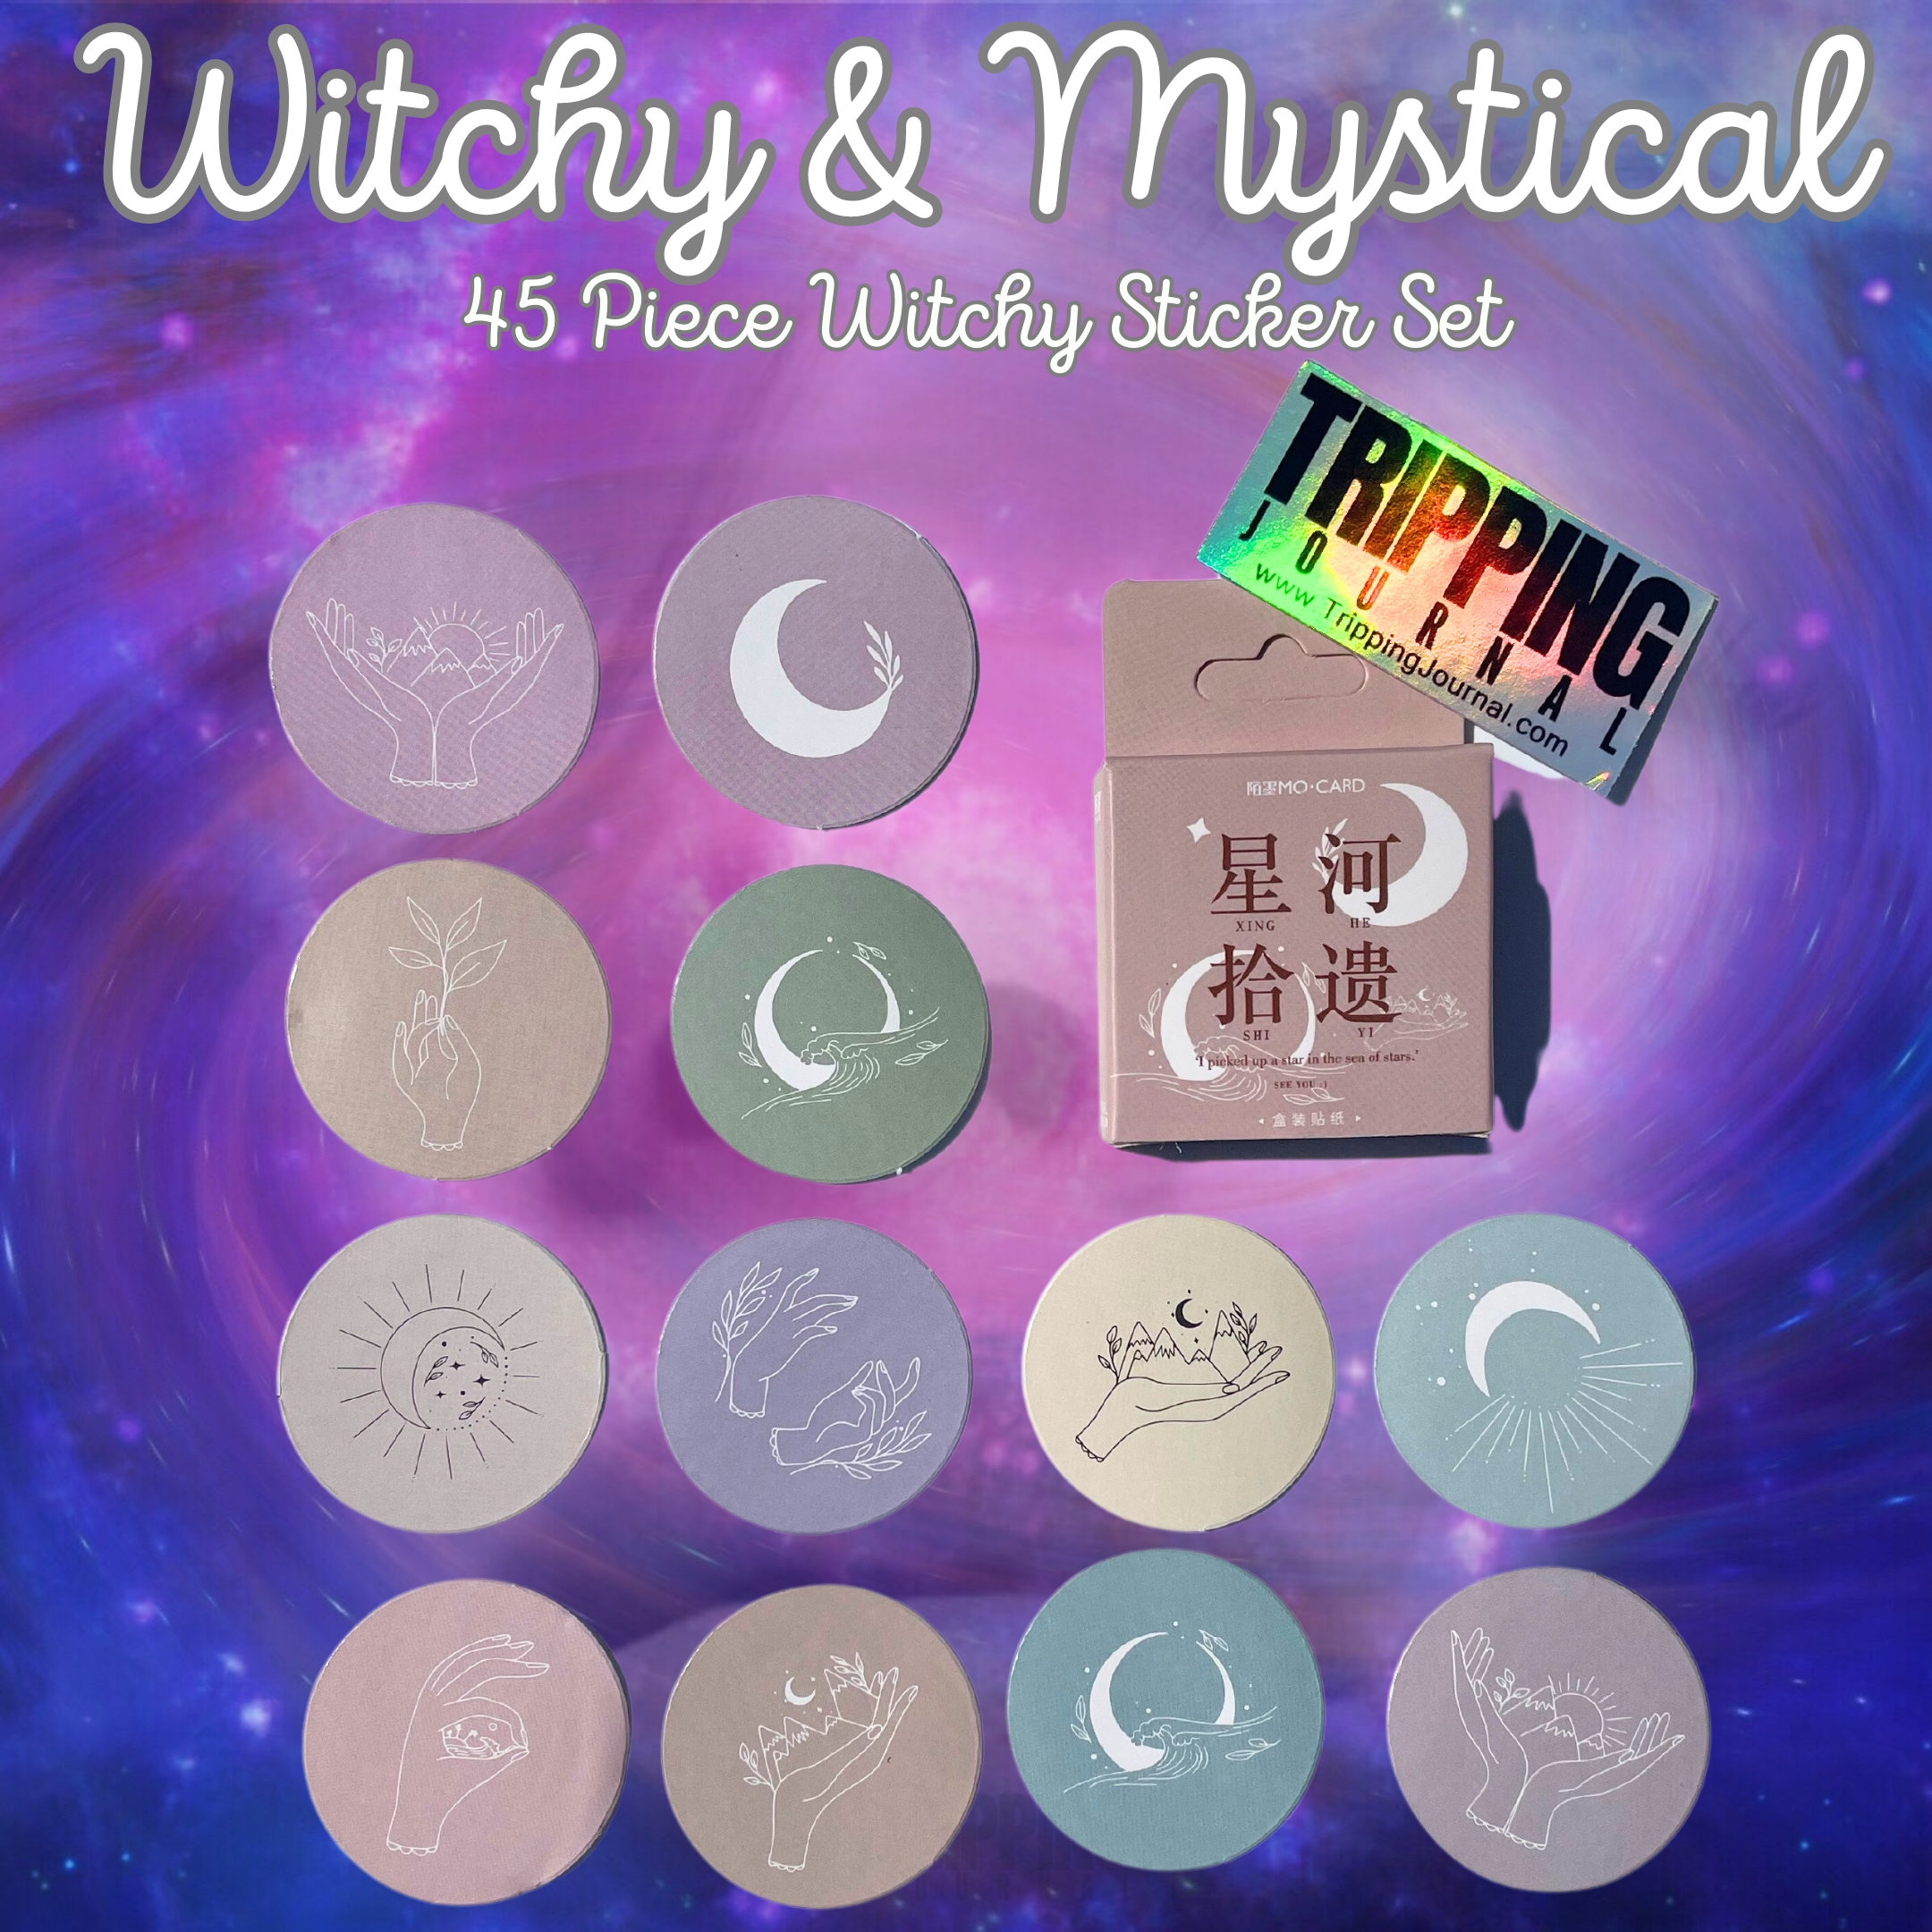 Witchy Digital Sticker Pack, Spiritual Stickers for Witchy Planner